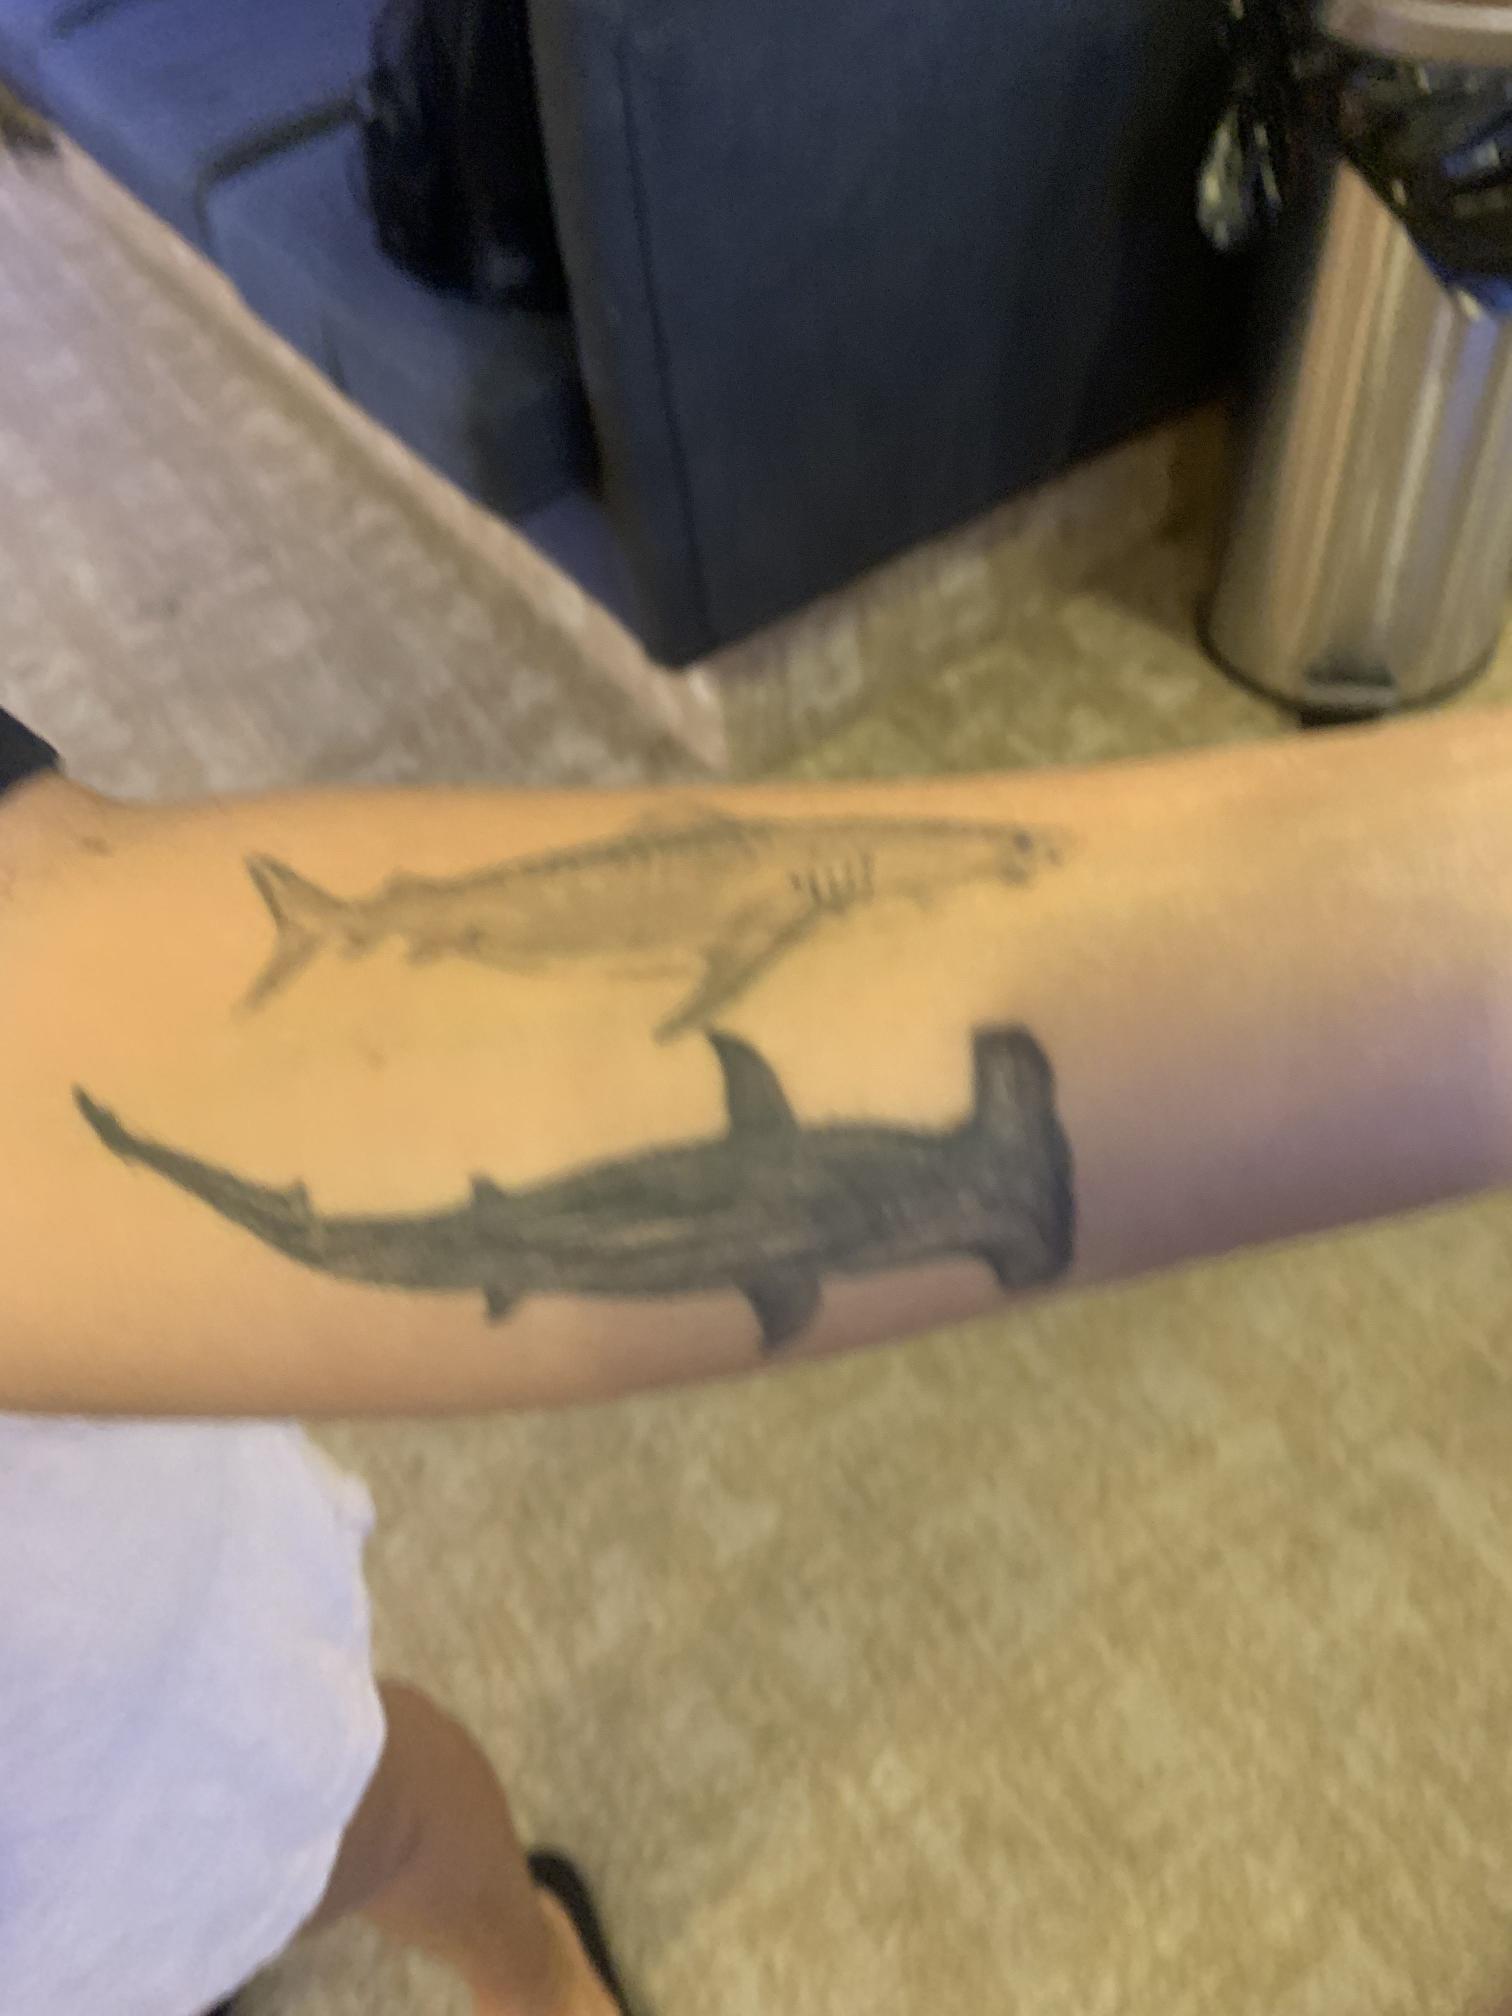 34 Good, Bad, And Painfully Regrettable Shark Tattoo...